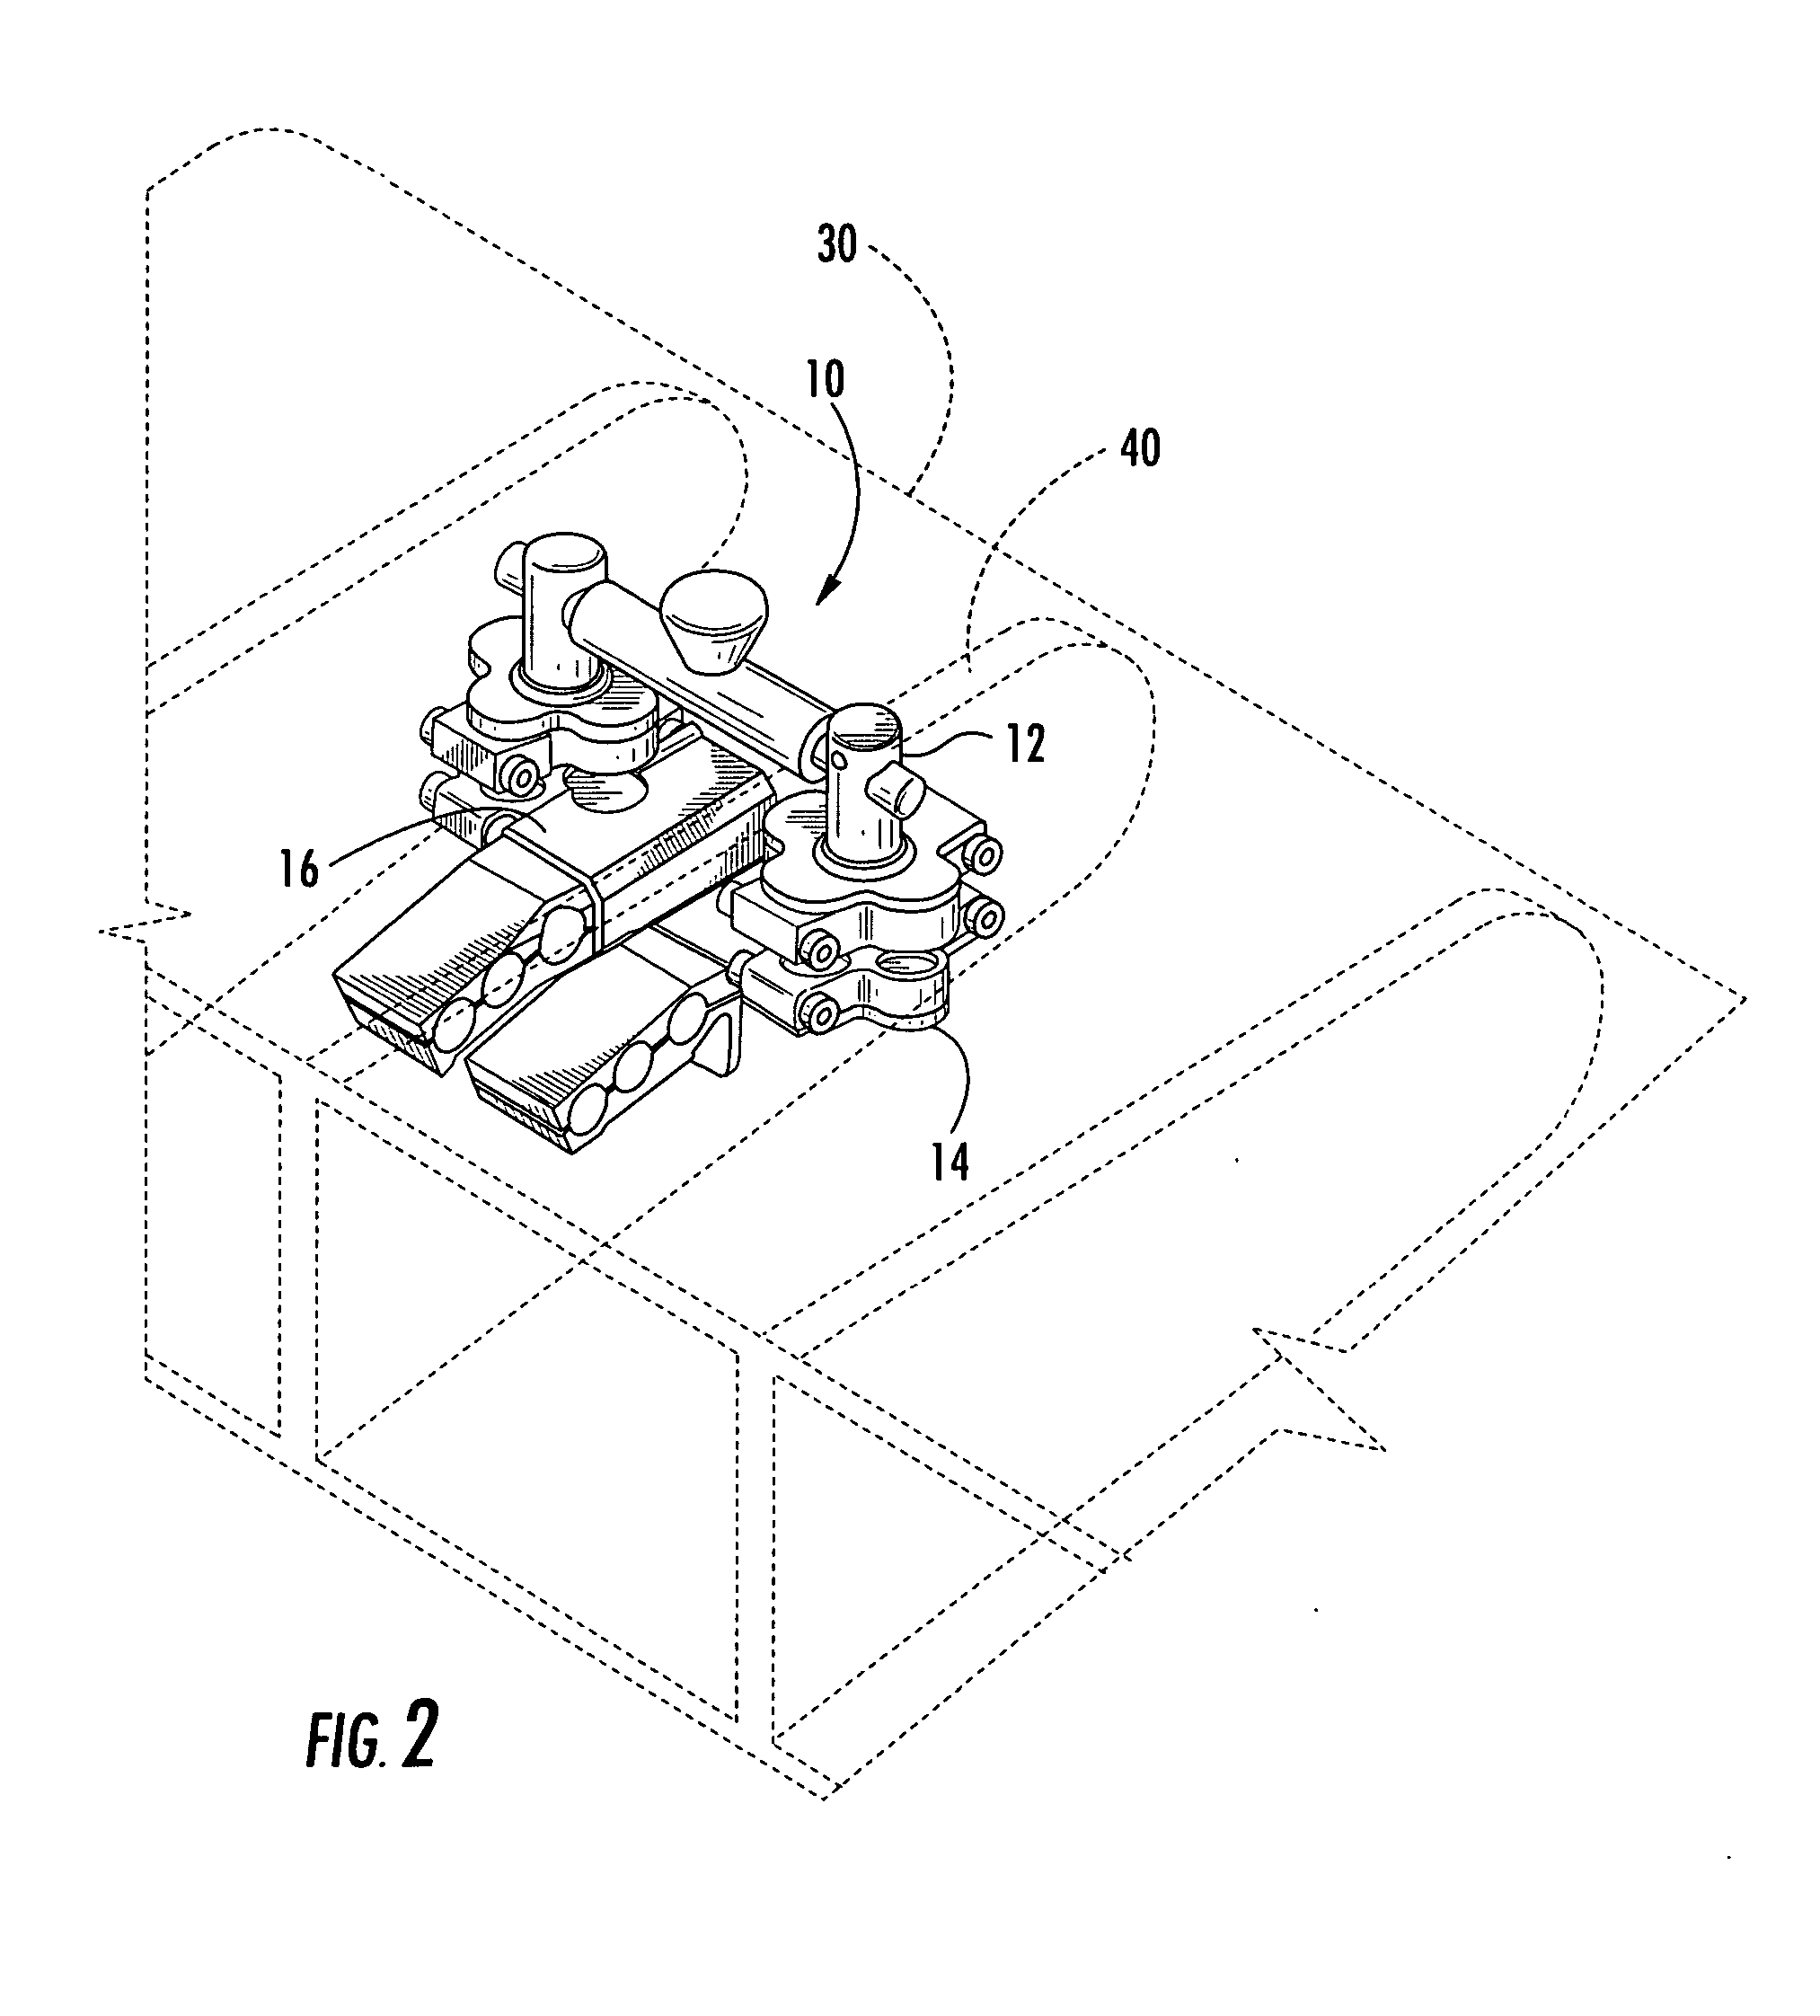 Non-destructive inspection device for inspecting limited-access features of a structure